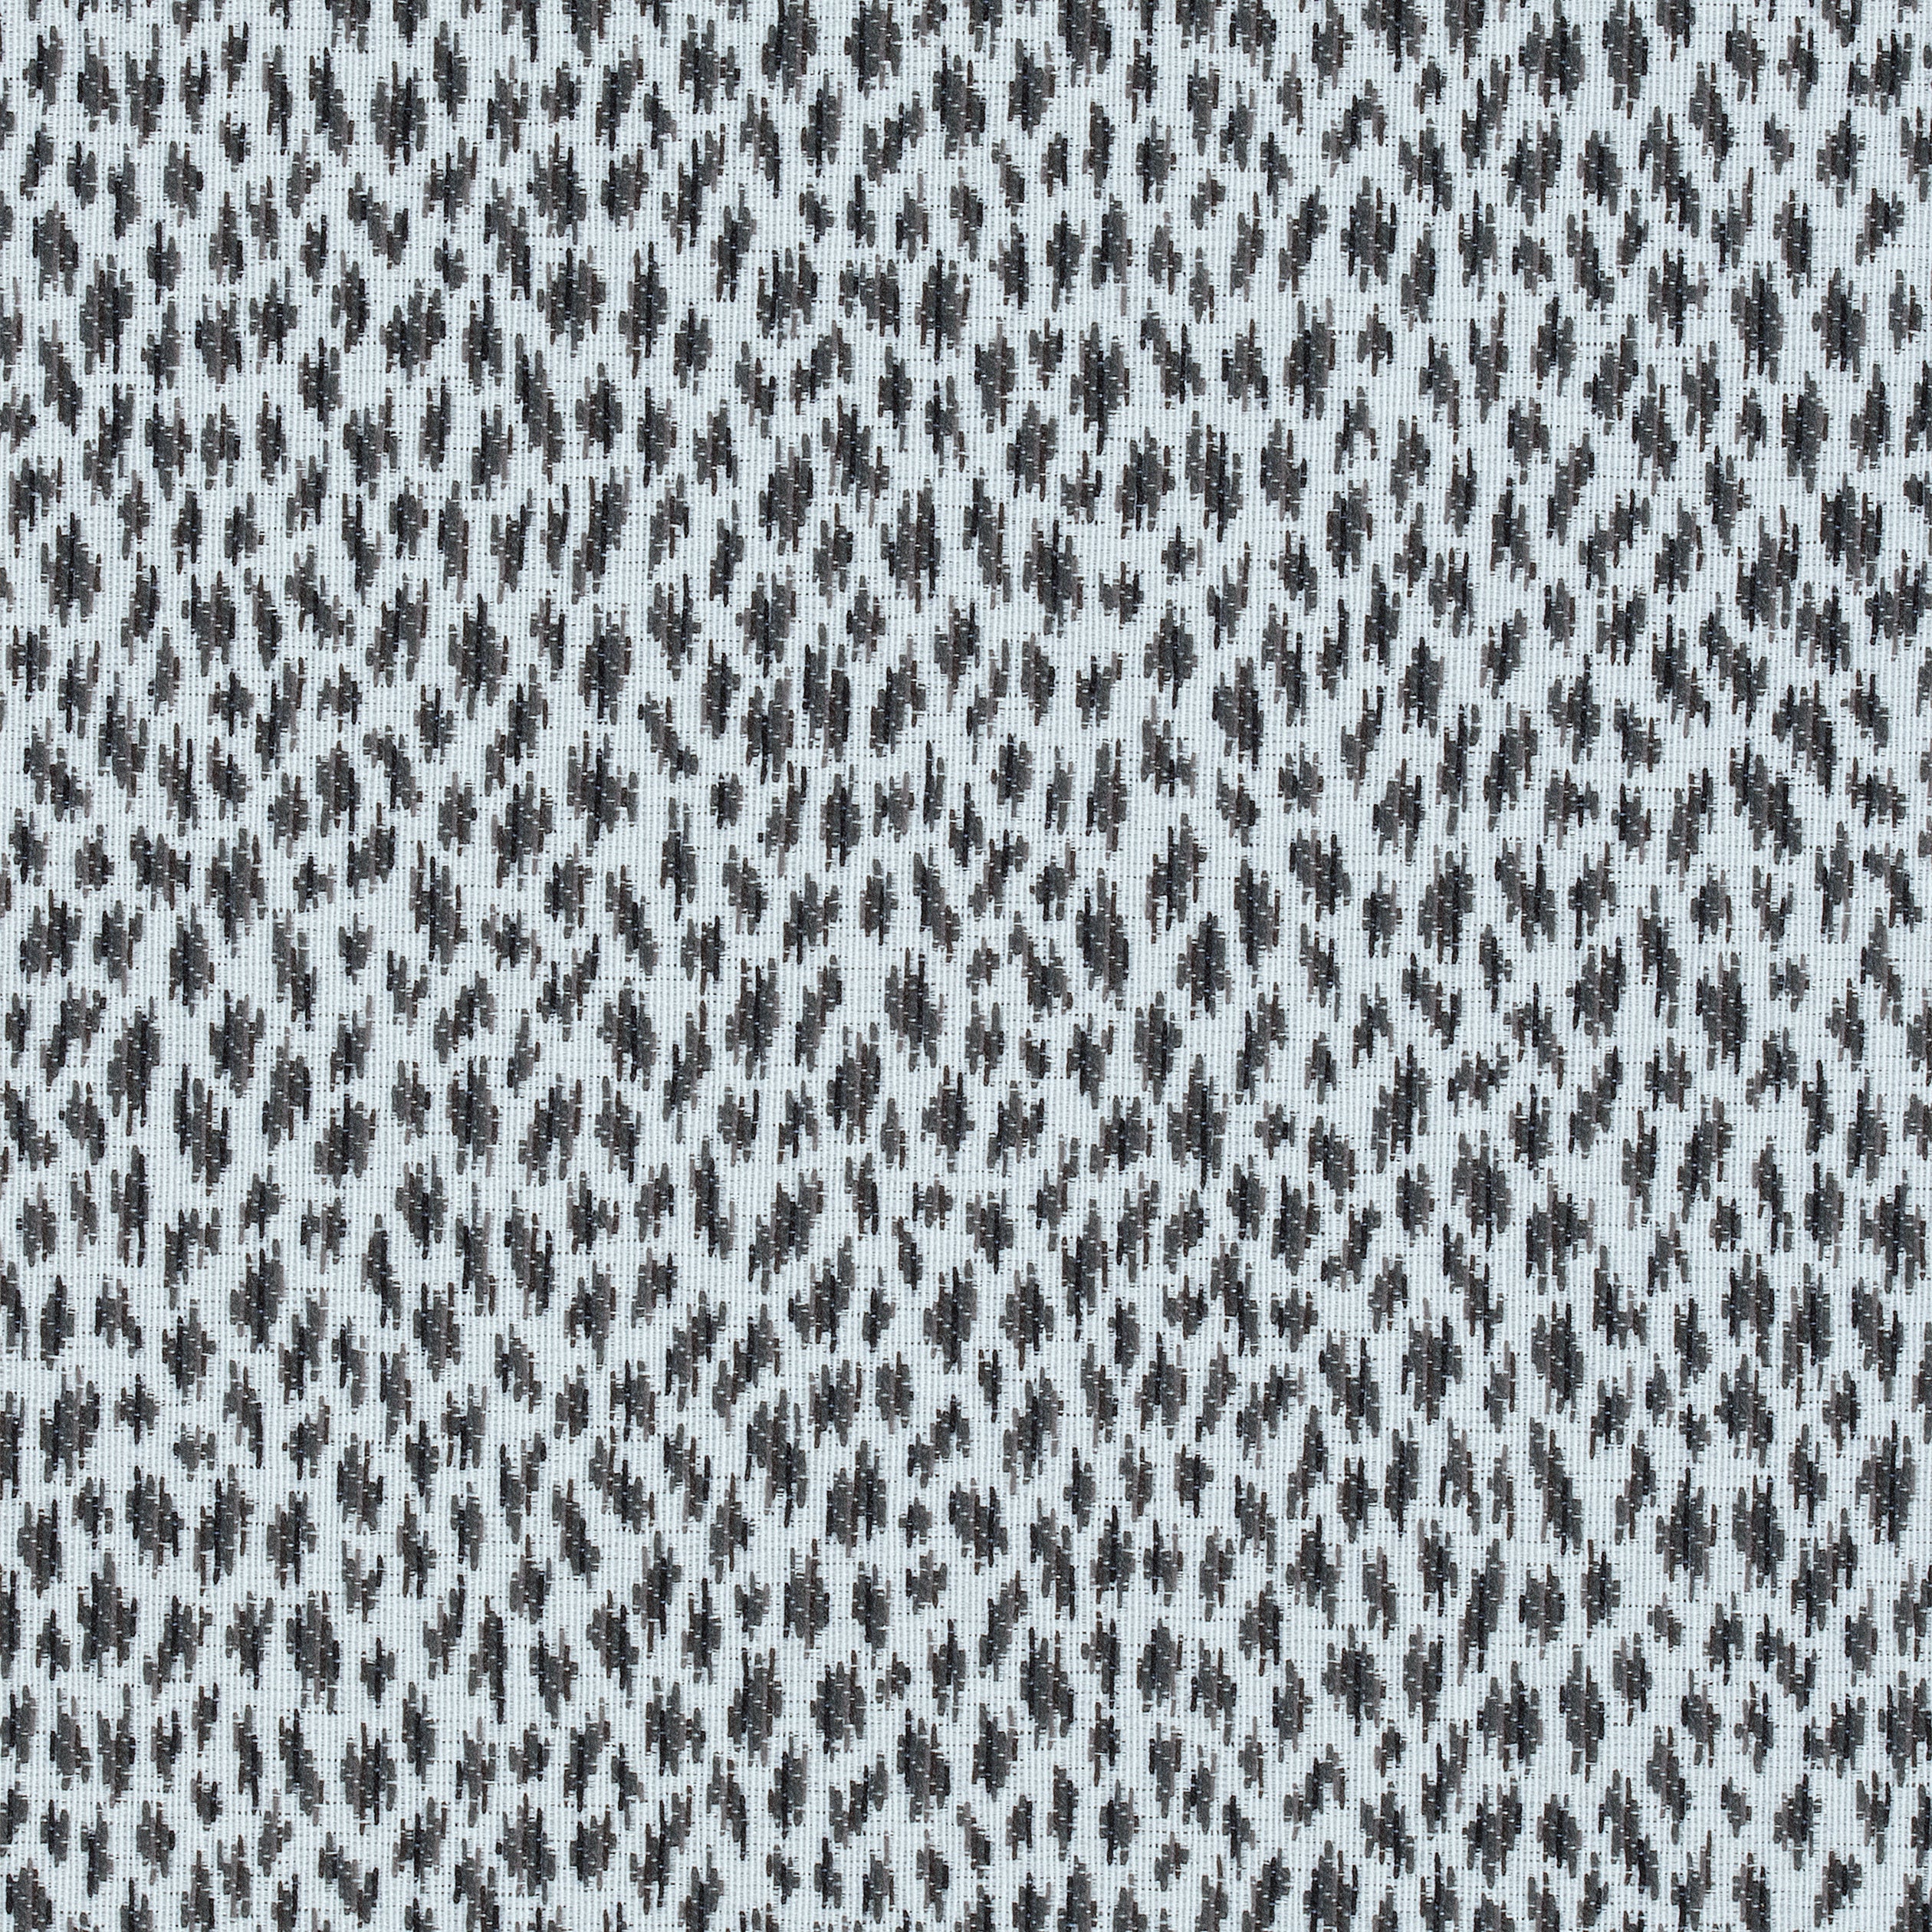 Citra fabric in black color - pattern number W80460 - by Thibaut in the Woven Resource Vol 10 Menagerie collection